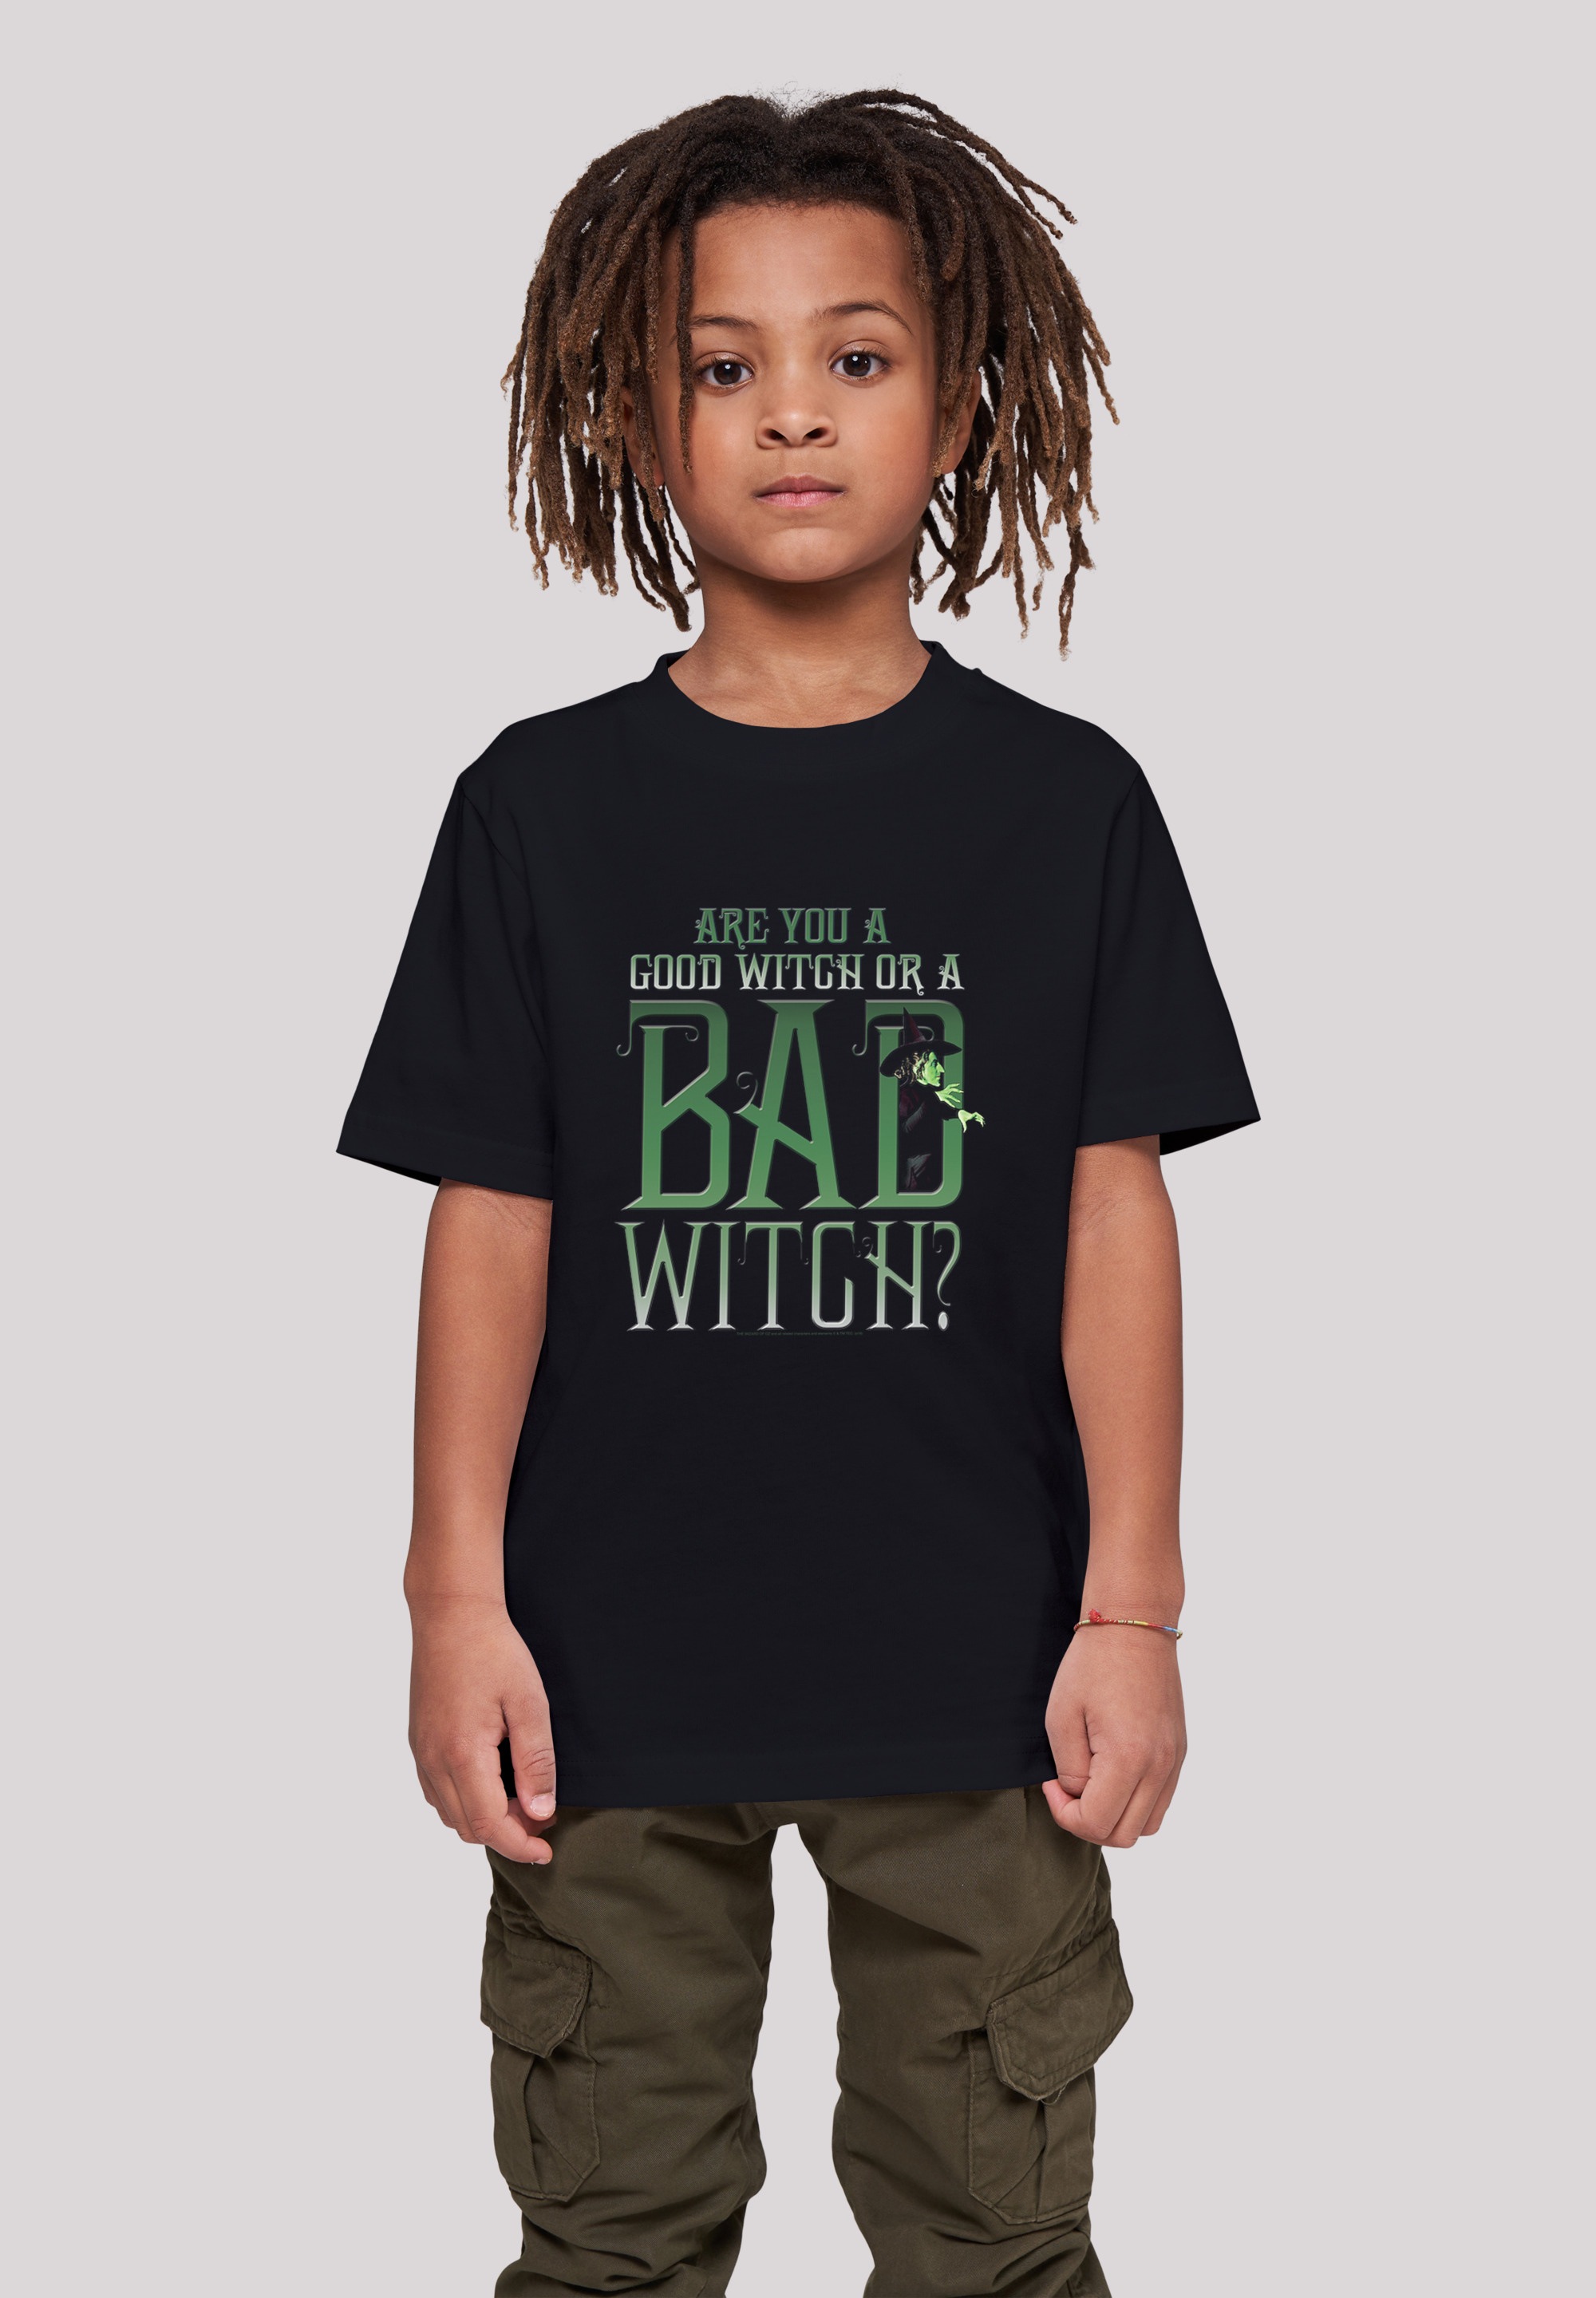 Black Friday F4NT4STIC »Wizard of Oz Witch T-Shirt | BAUR Witch«, Good Bad Print